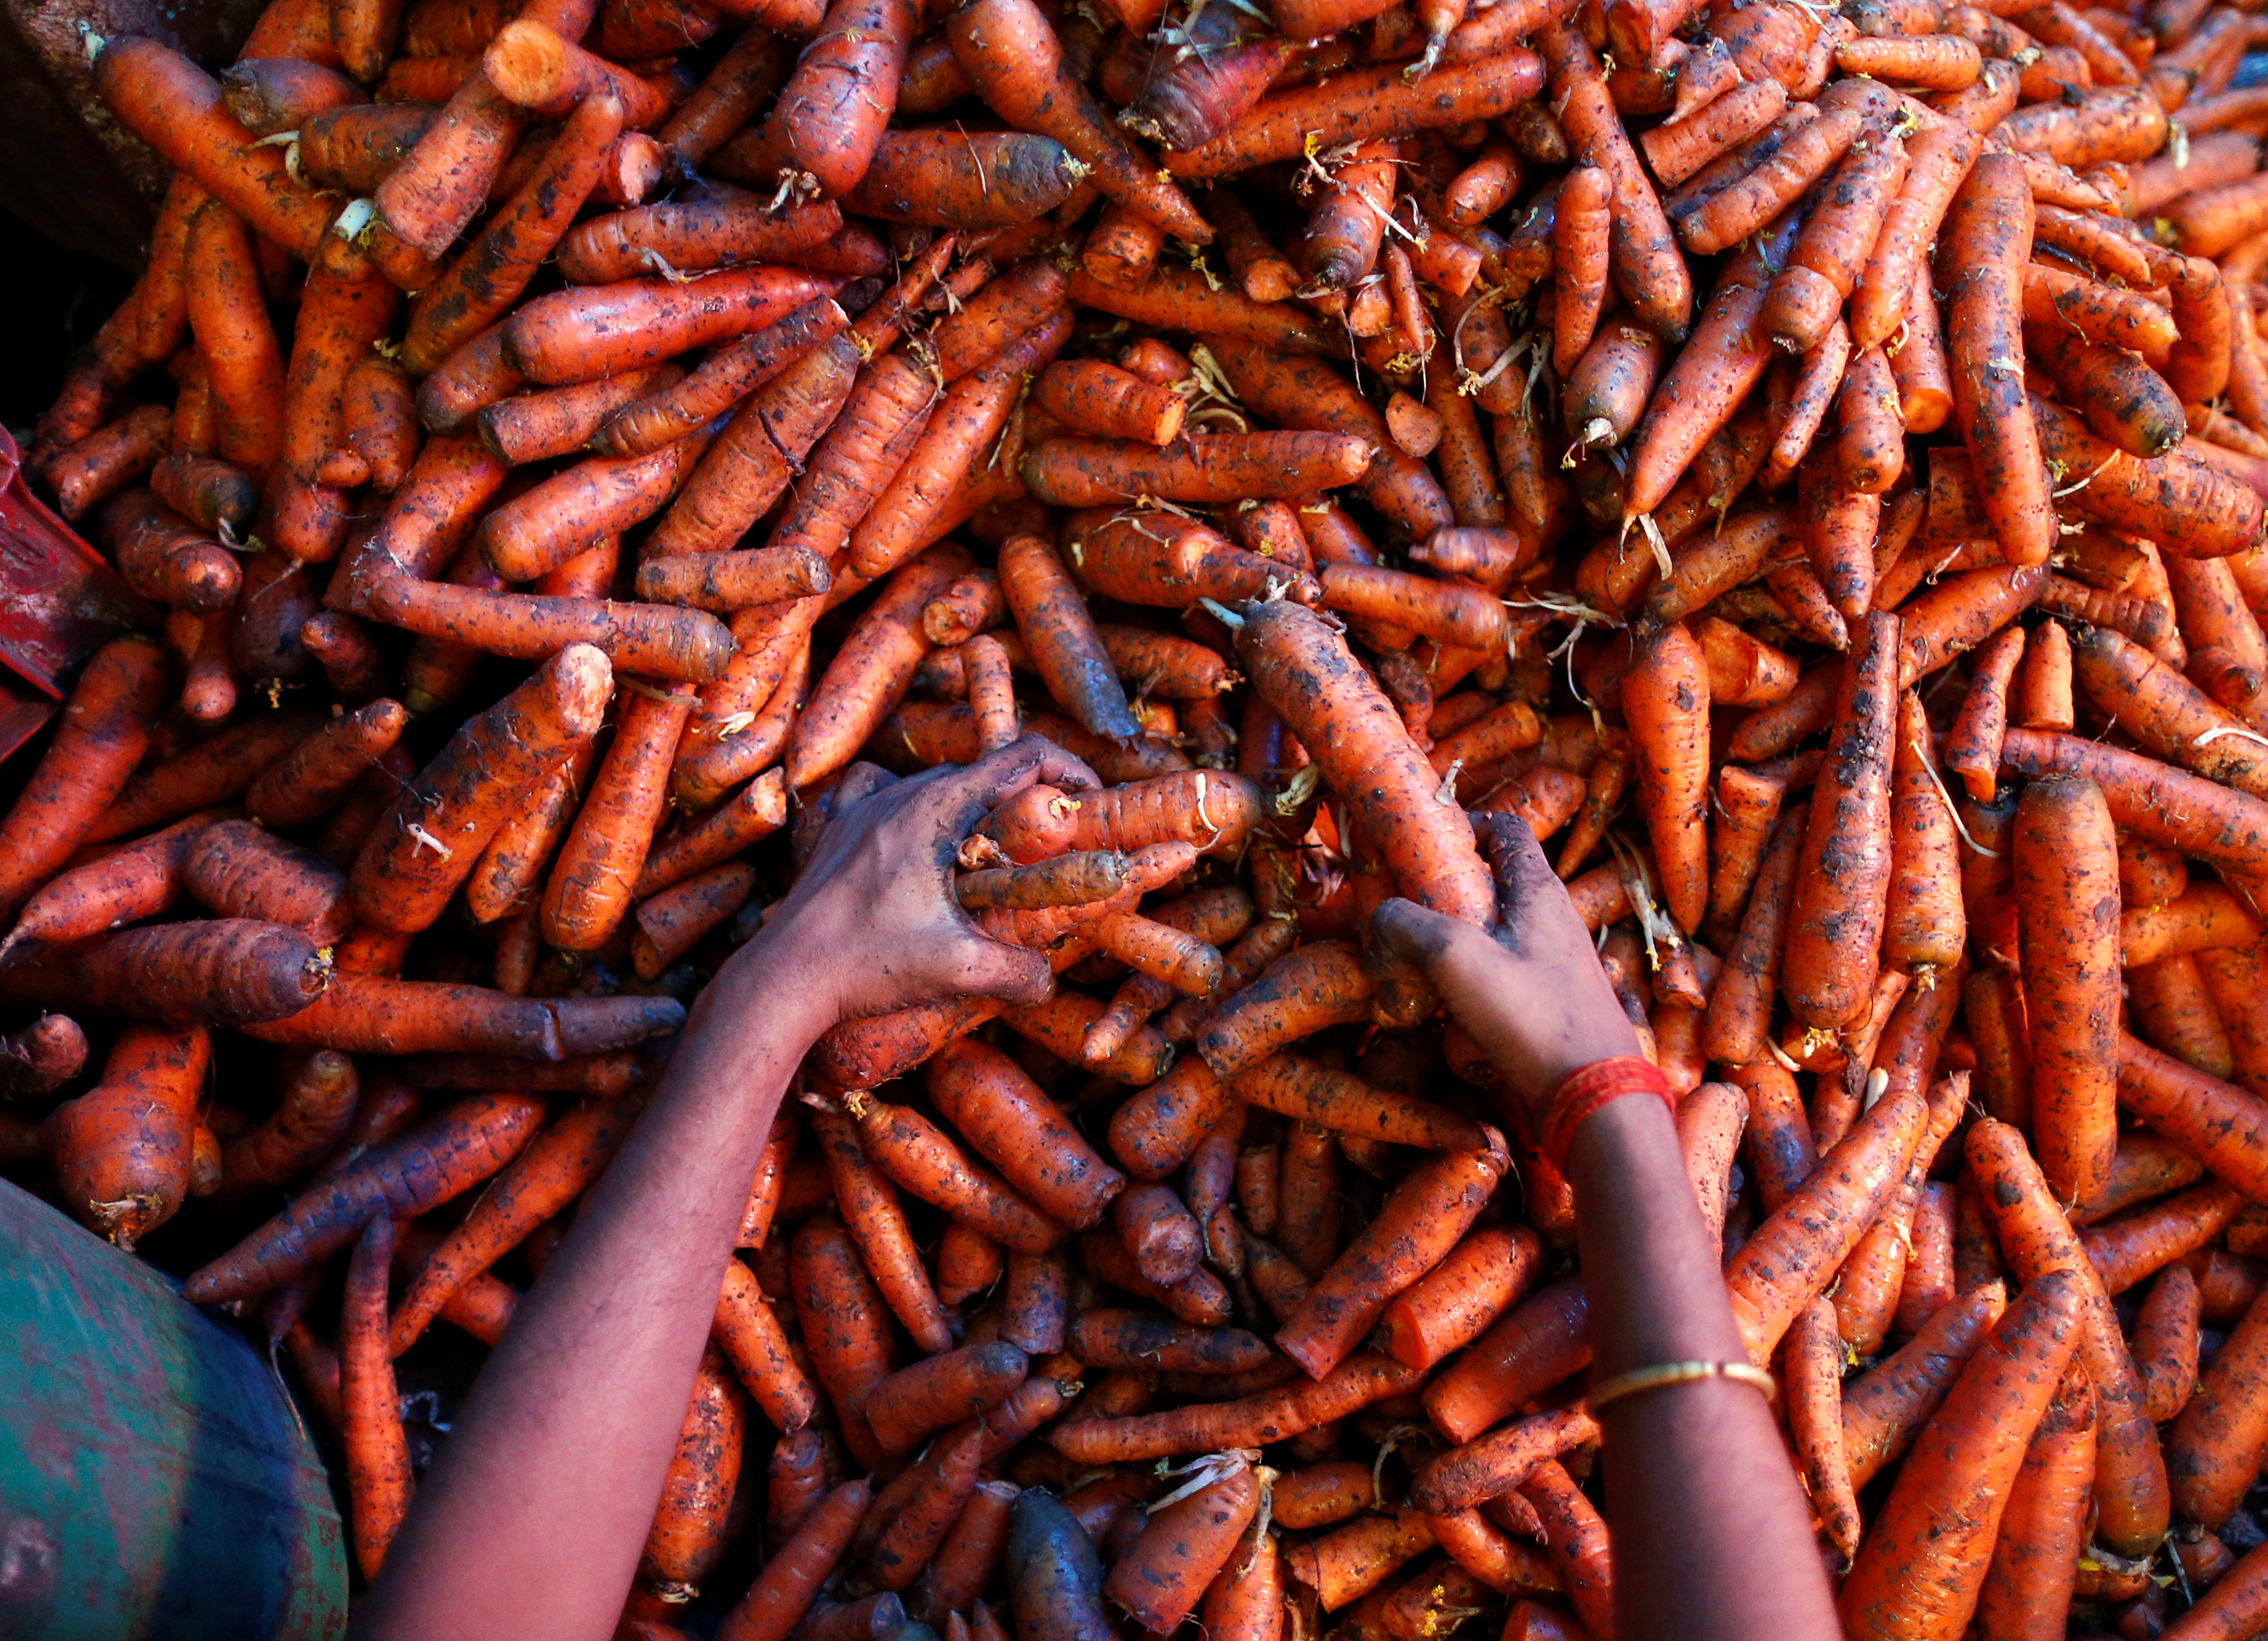 A worker sorts carrots at a wholesale vegetable market in Mumbai, India, June 14, 2016. REUTERS/Danish Siddiqui